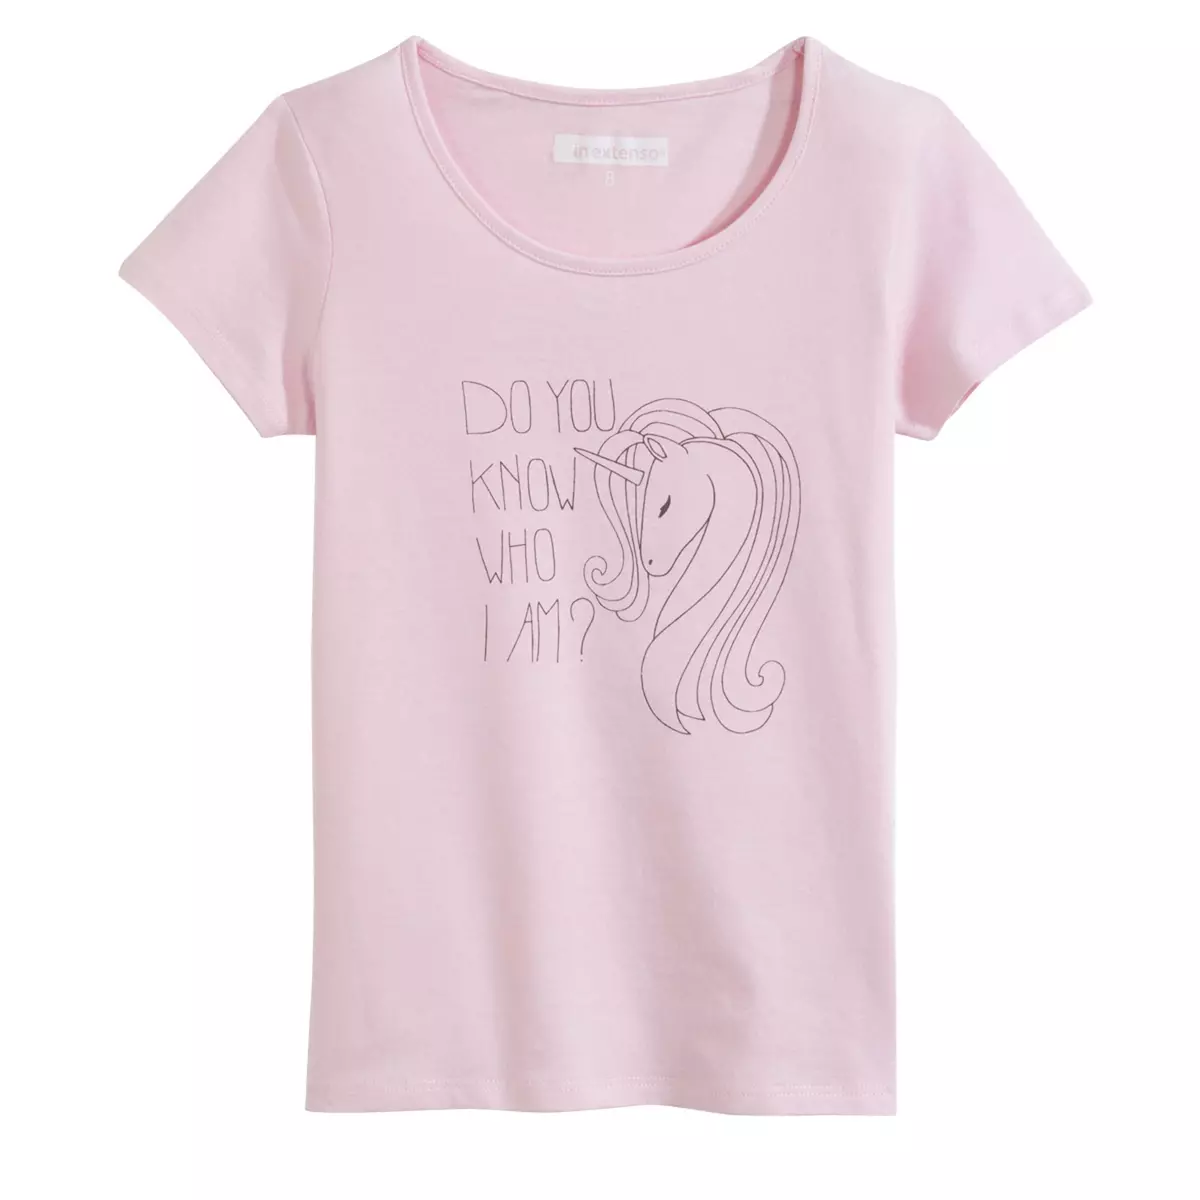 INEXTENSO T-shirt licorne manches courtes fille 